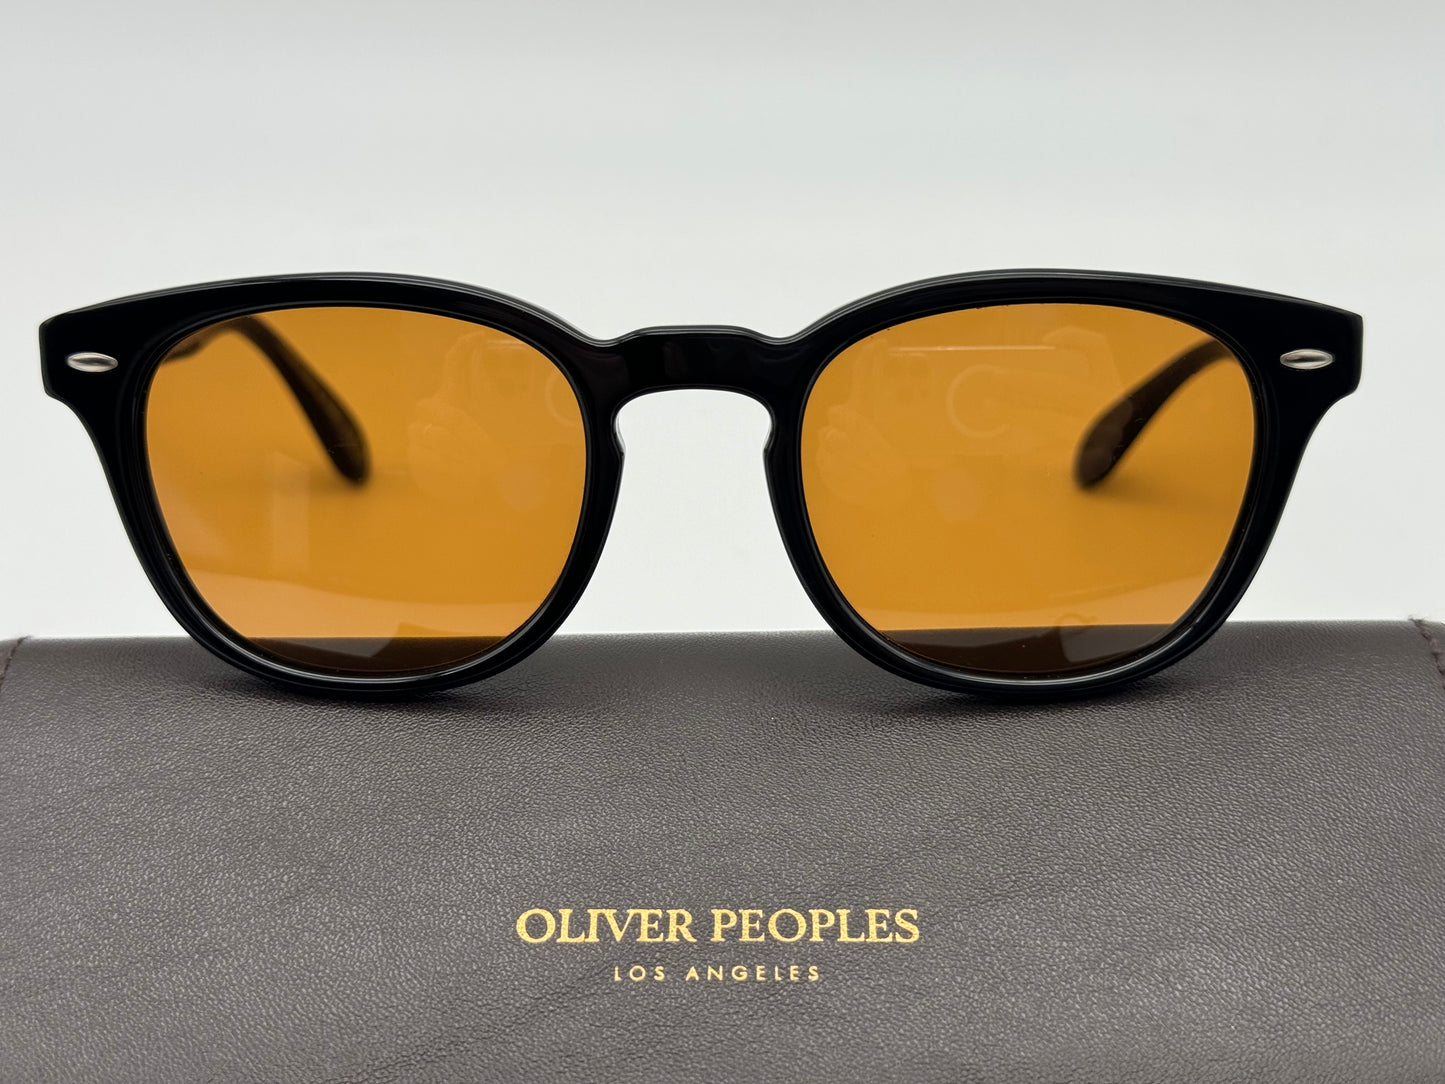 Oliver Peoples Sheldrake Sun Limited Edition 49mm Black / Cognac 1 of 100 pieces Preowned